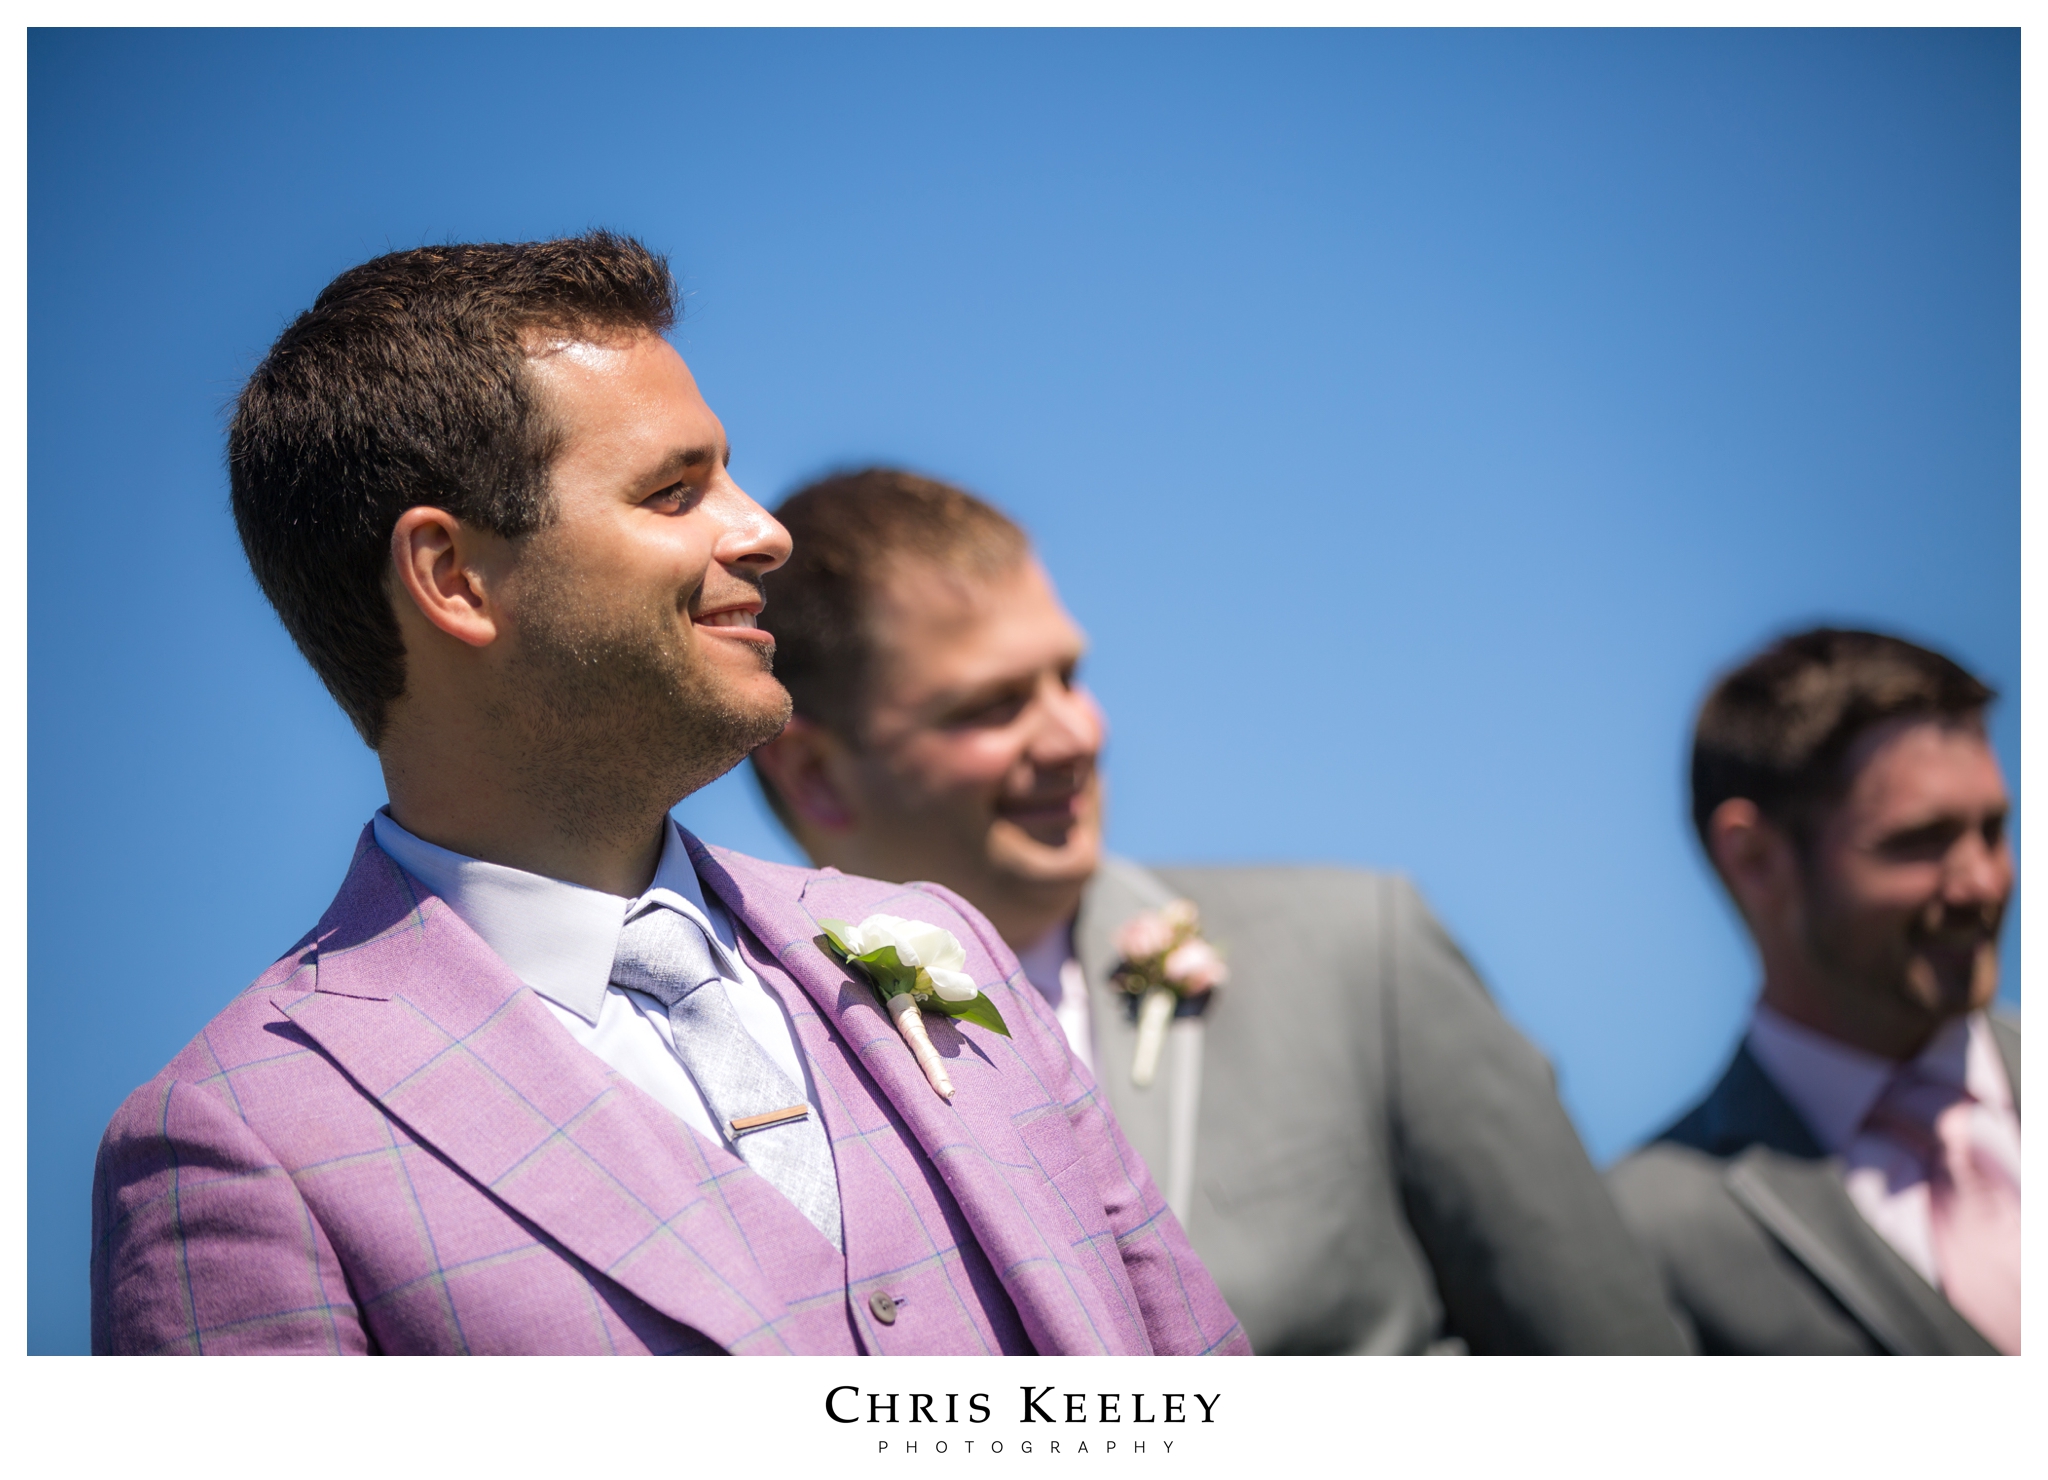 groom-waiting-for-bride-at-ceremony.jpg